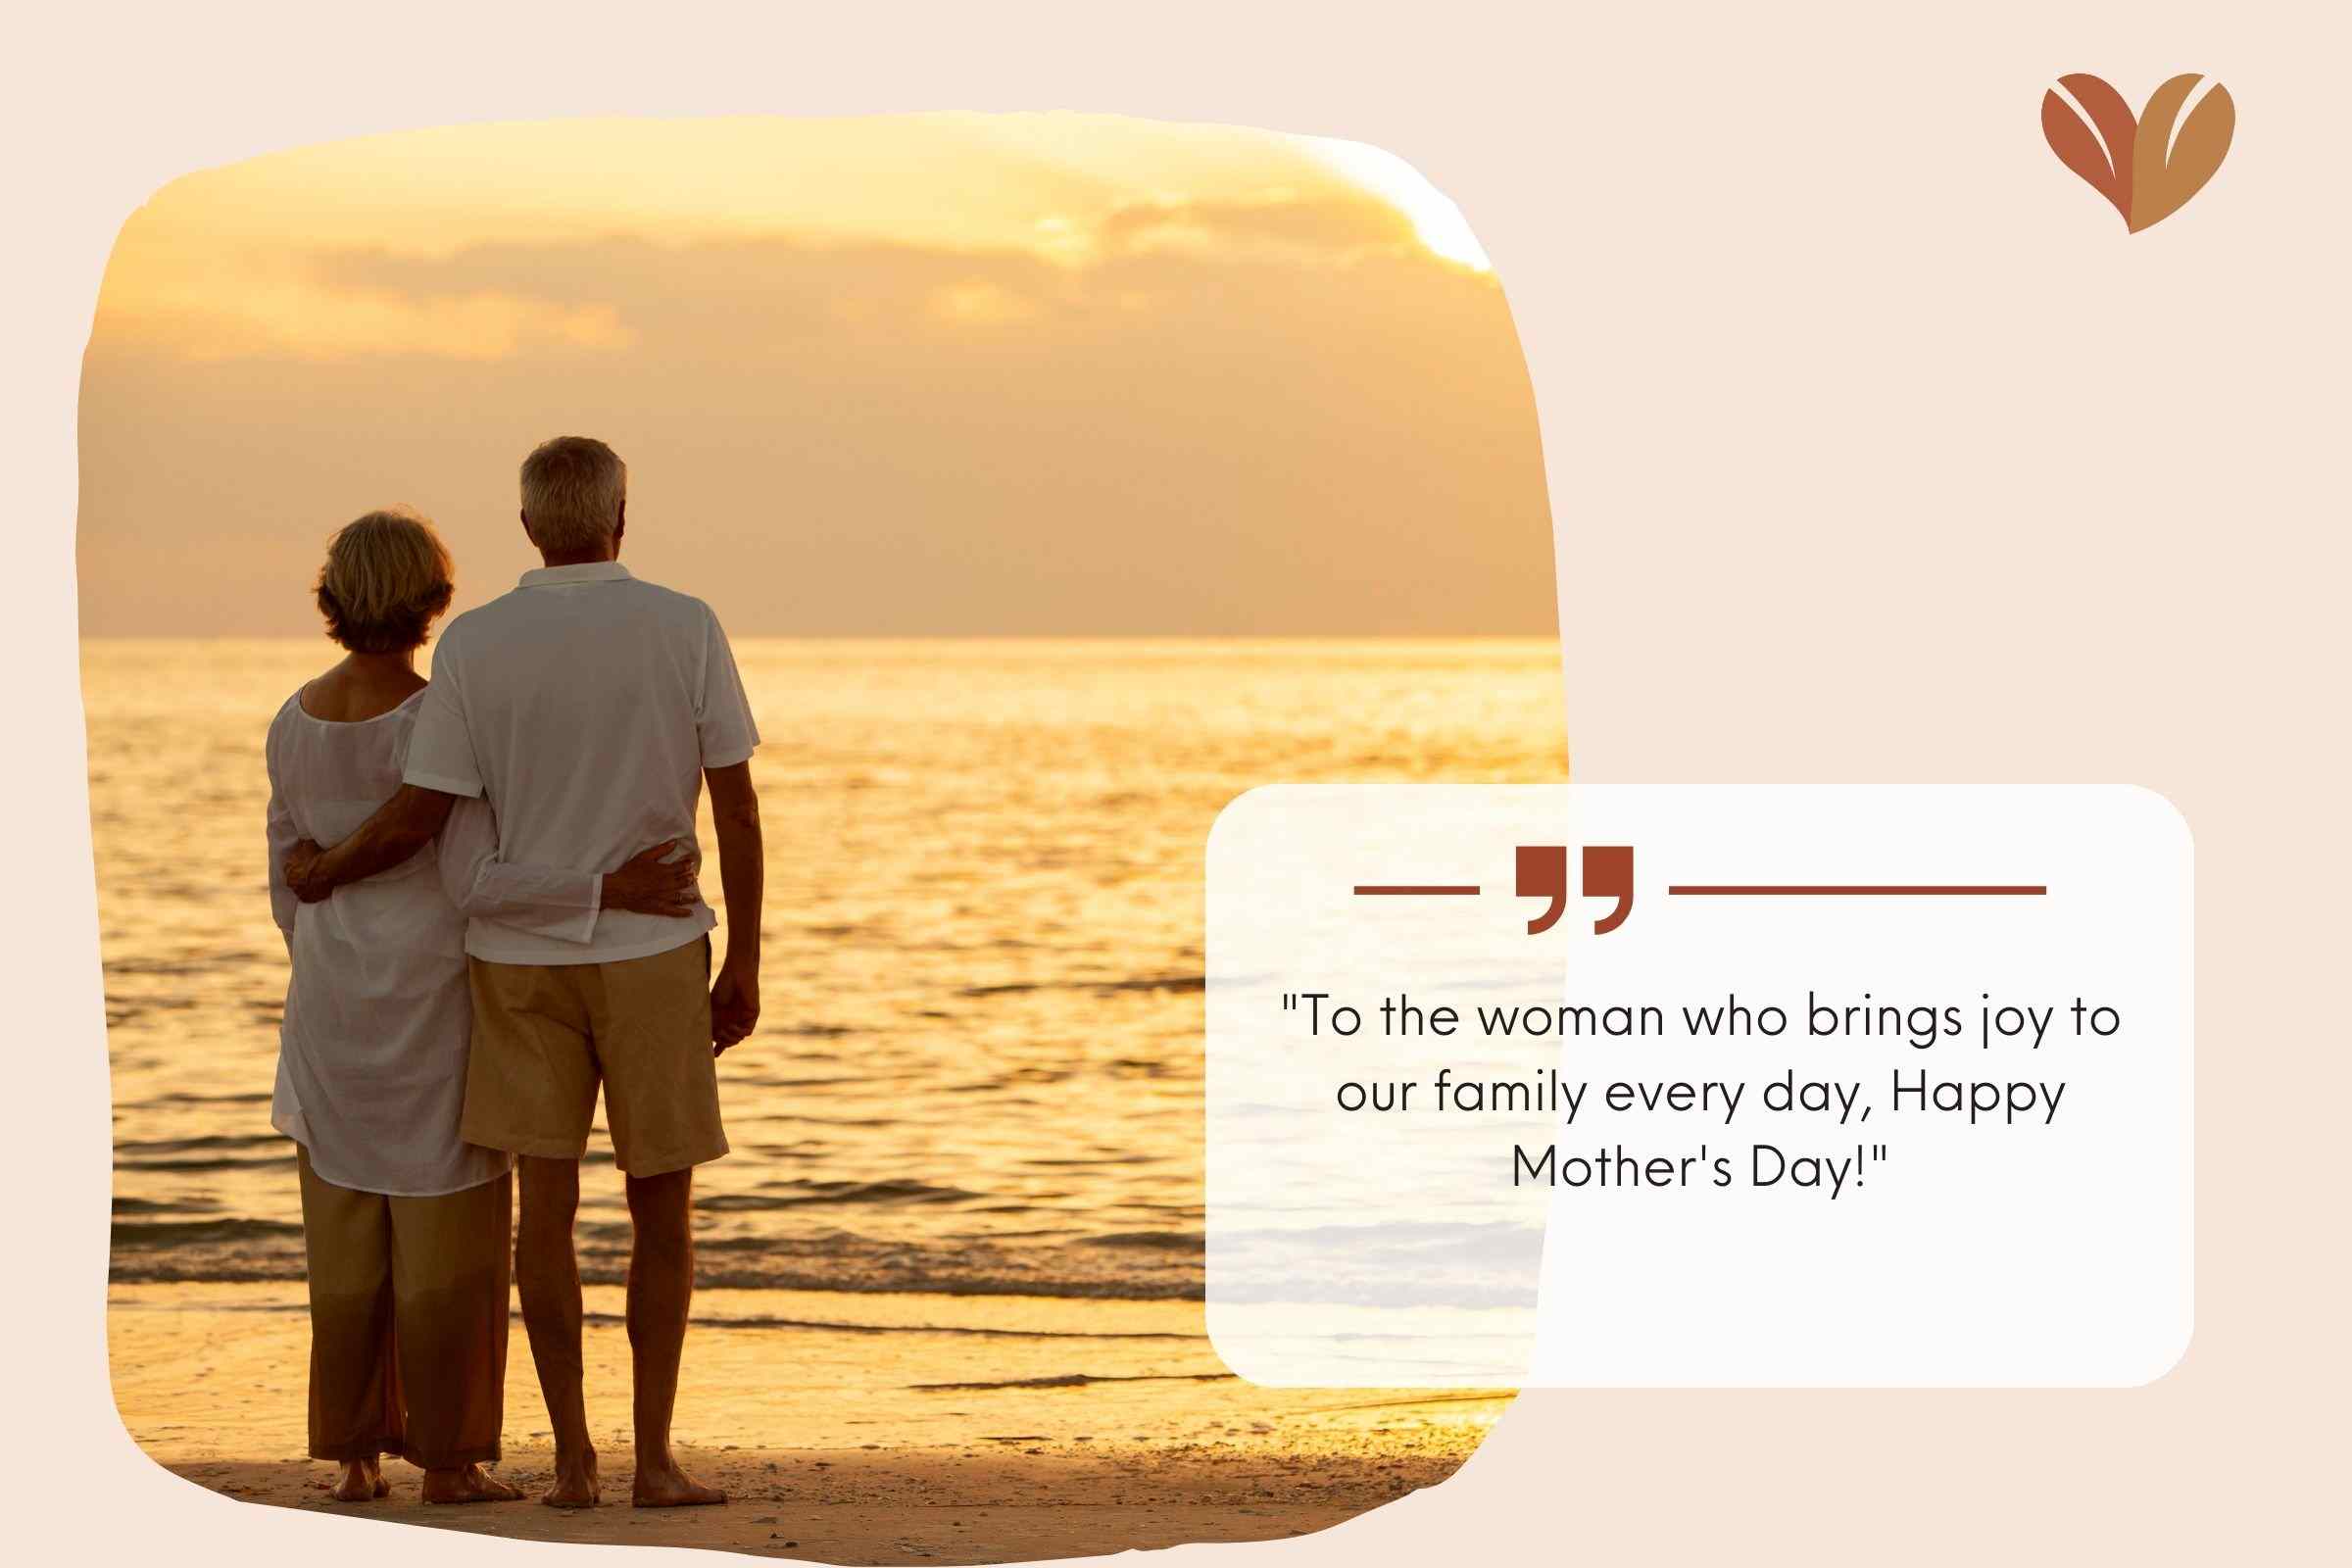 Funny Mothers Day Quotes from Husband to Wife who brings joy to our family every day - Funny mothers day quotes from husband to wife